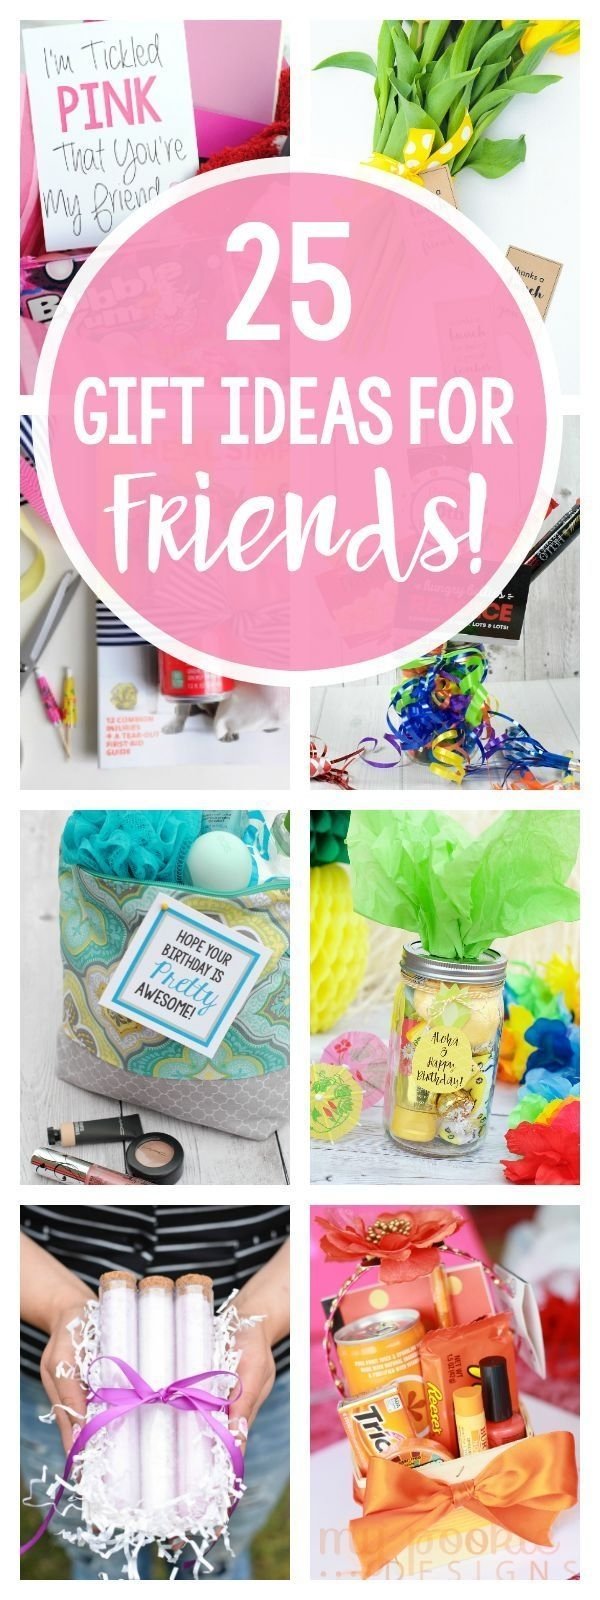 10 Perfect Gift Ideas For Women Friends 1134 best gift ideas images on pinterest a kiss basket of 10 2022